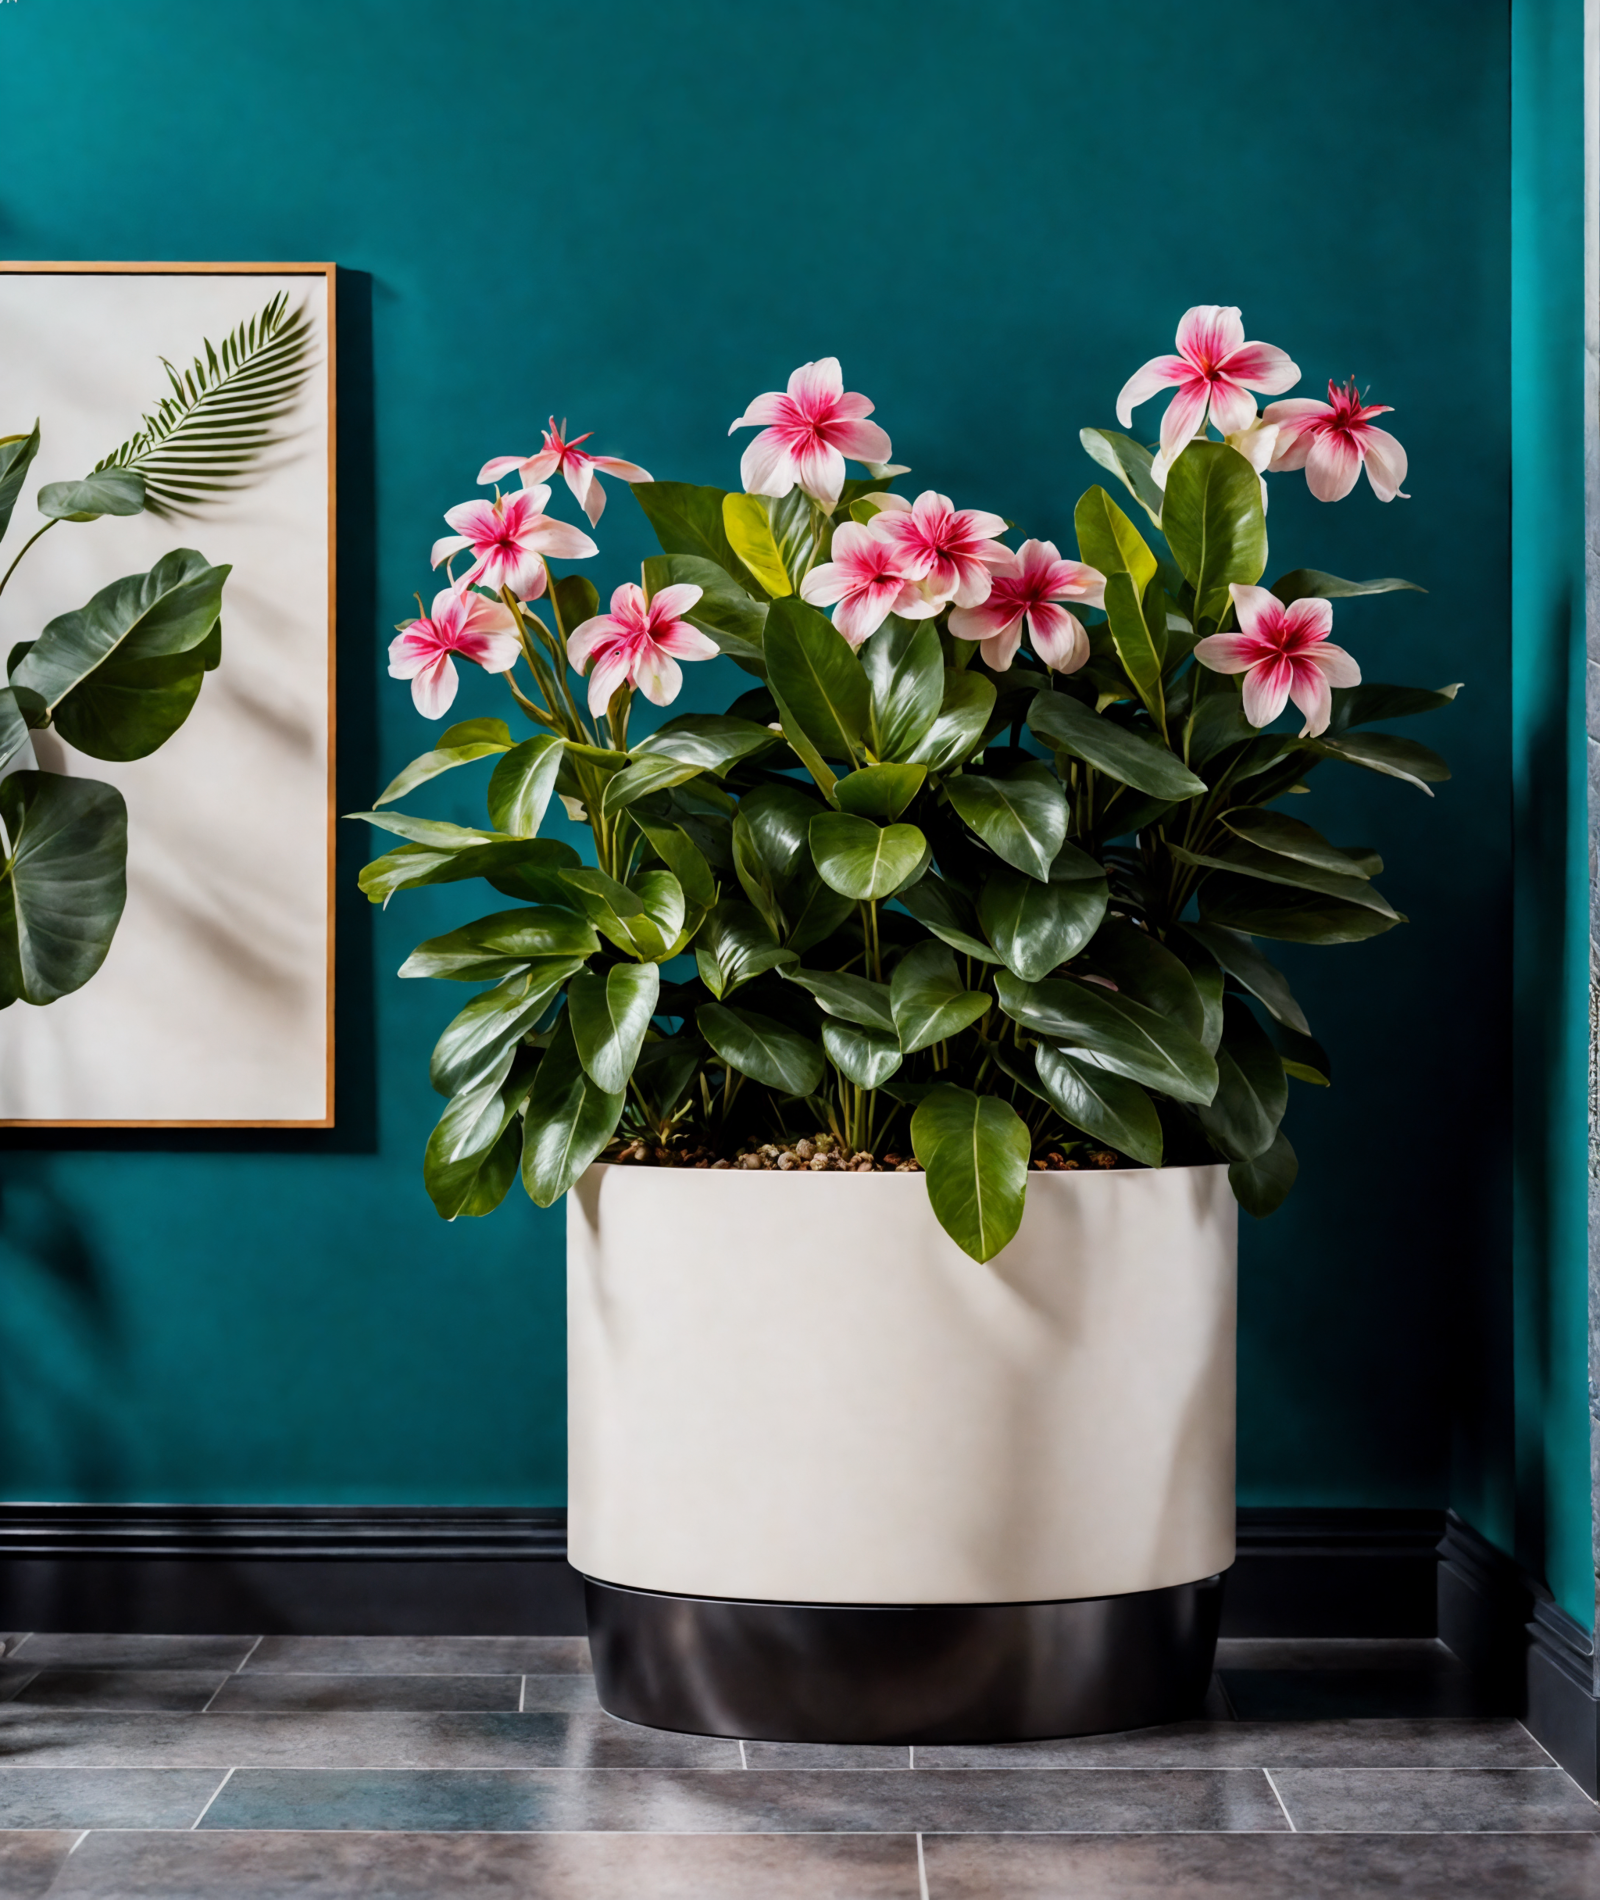 Two pink Catharanthus roseus flowers in a pot on a rich black wood floor, indoor setting.